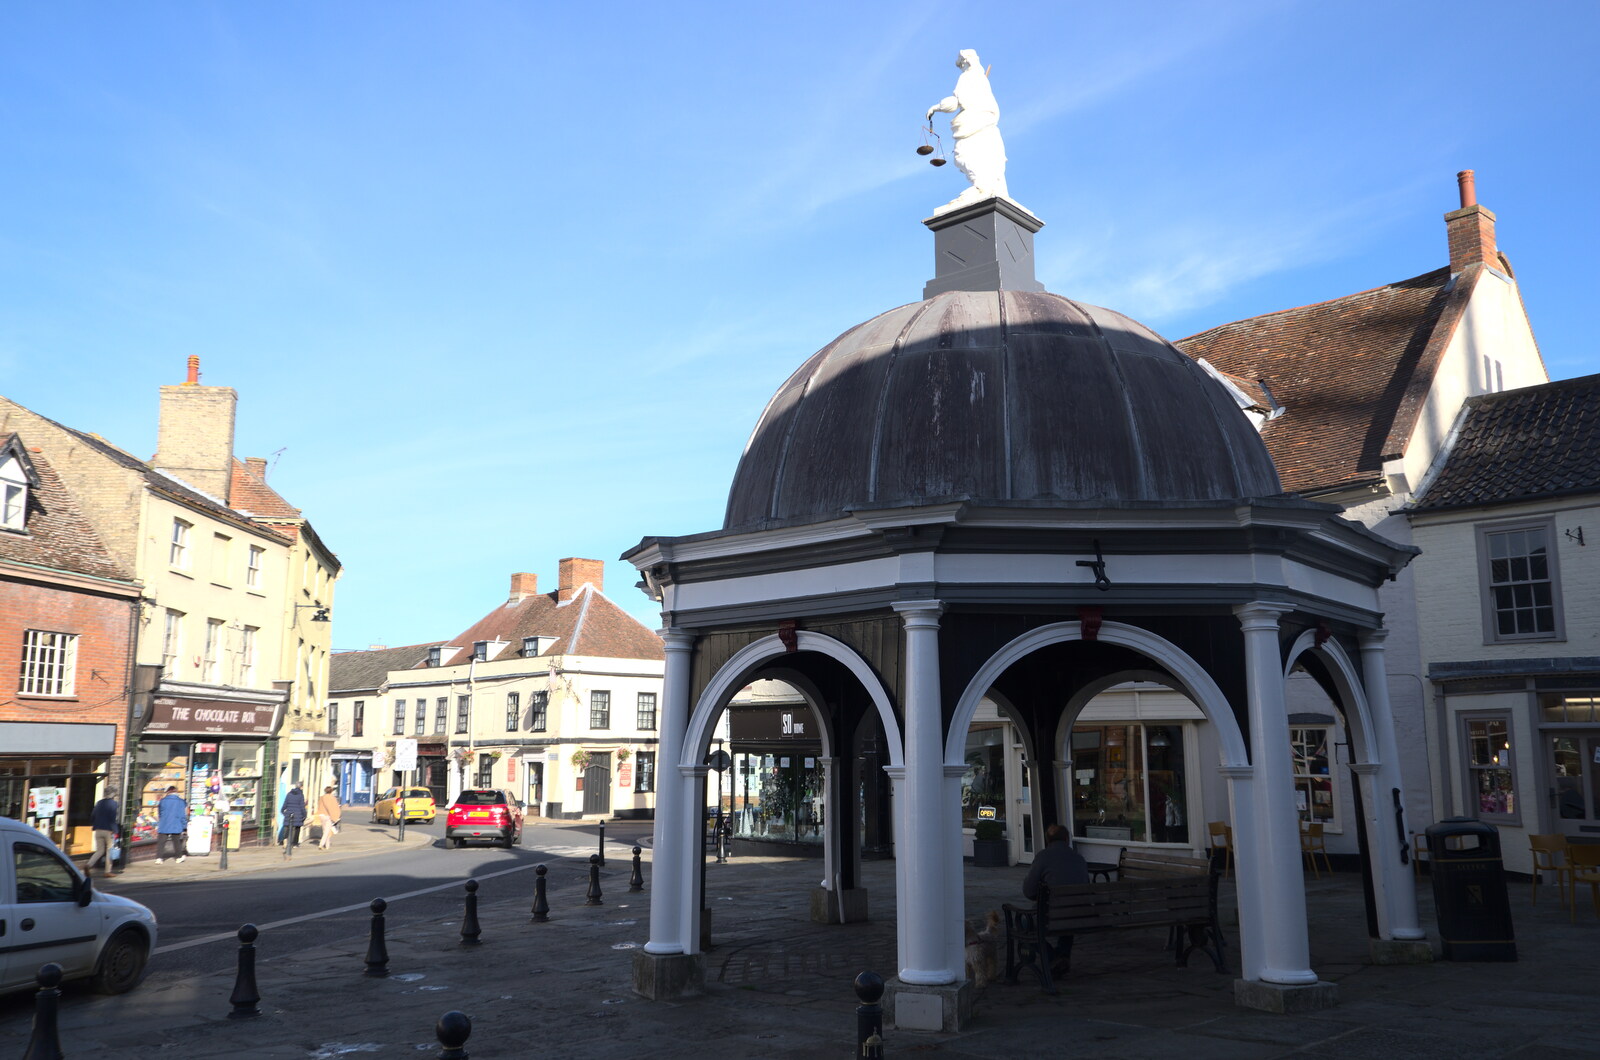 A Postcard from Bungay, Suffolk - 2nd November 2022: Bungay's Buttermarket